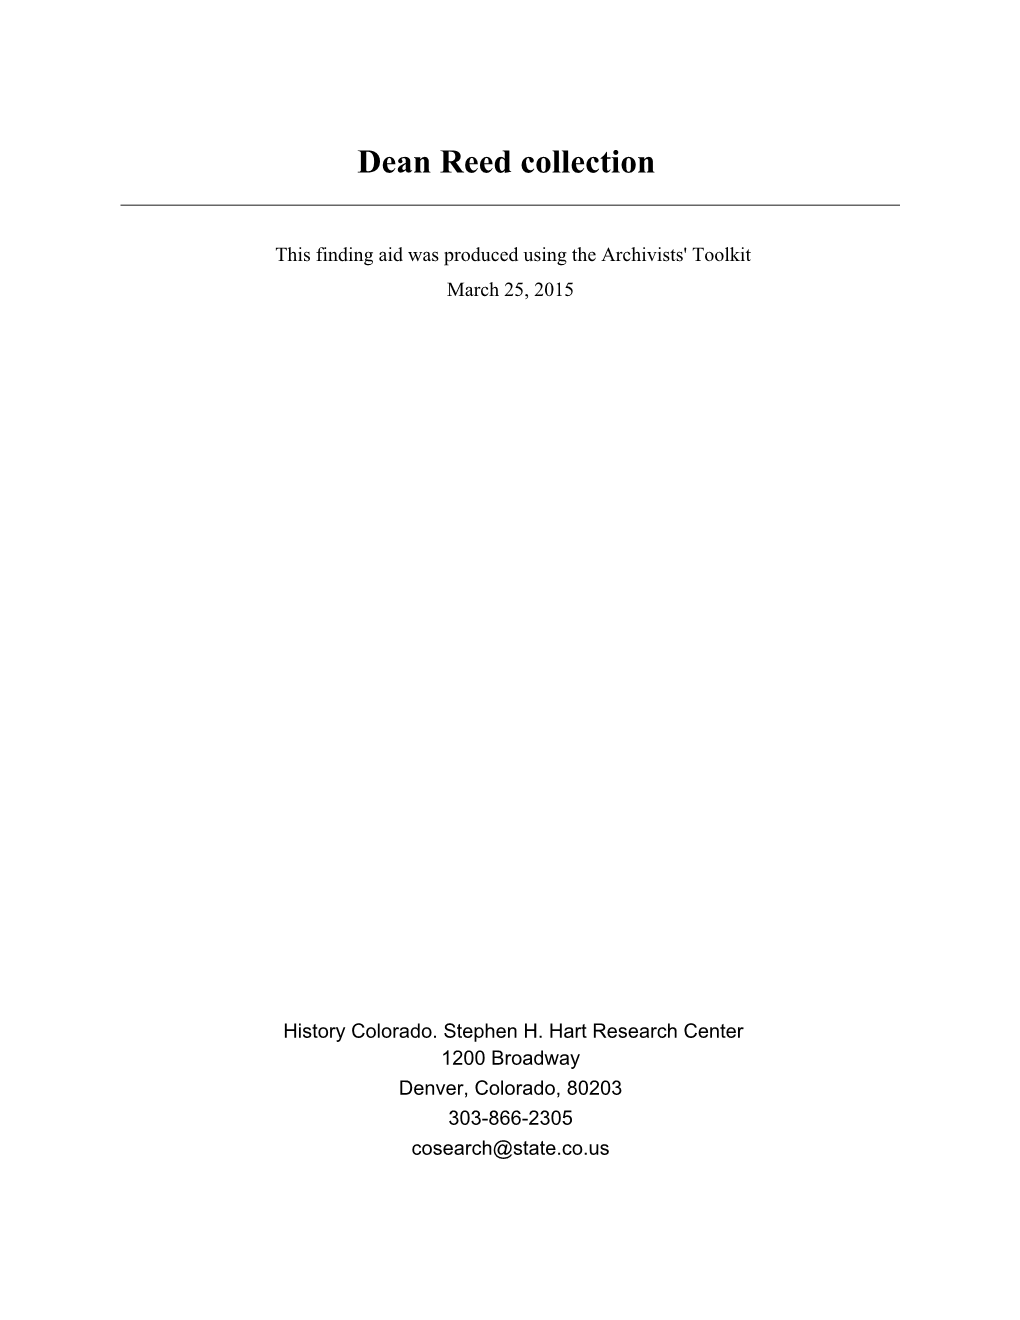 Dean Reed Collection